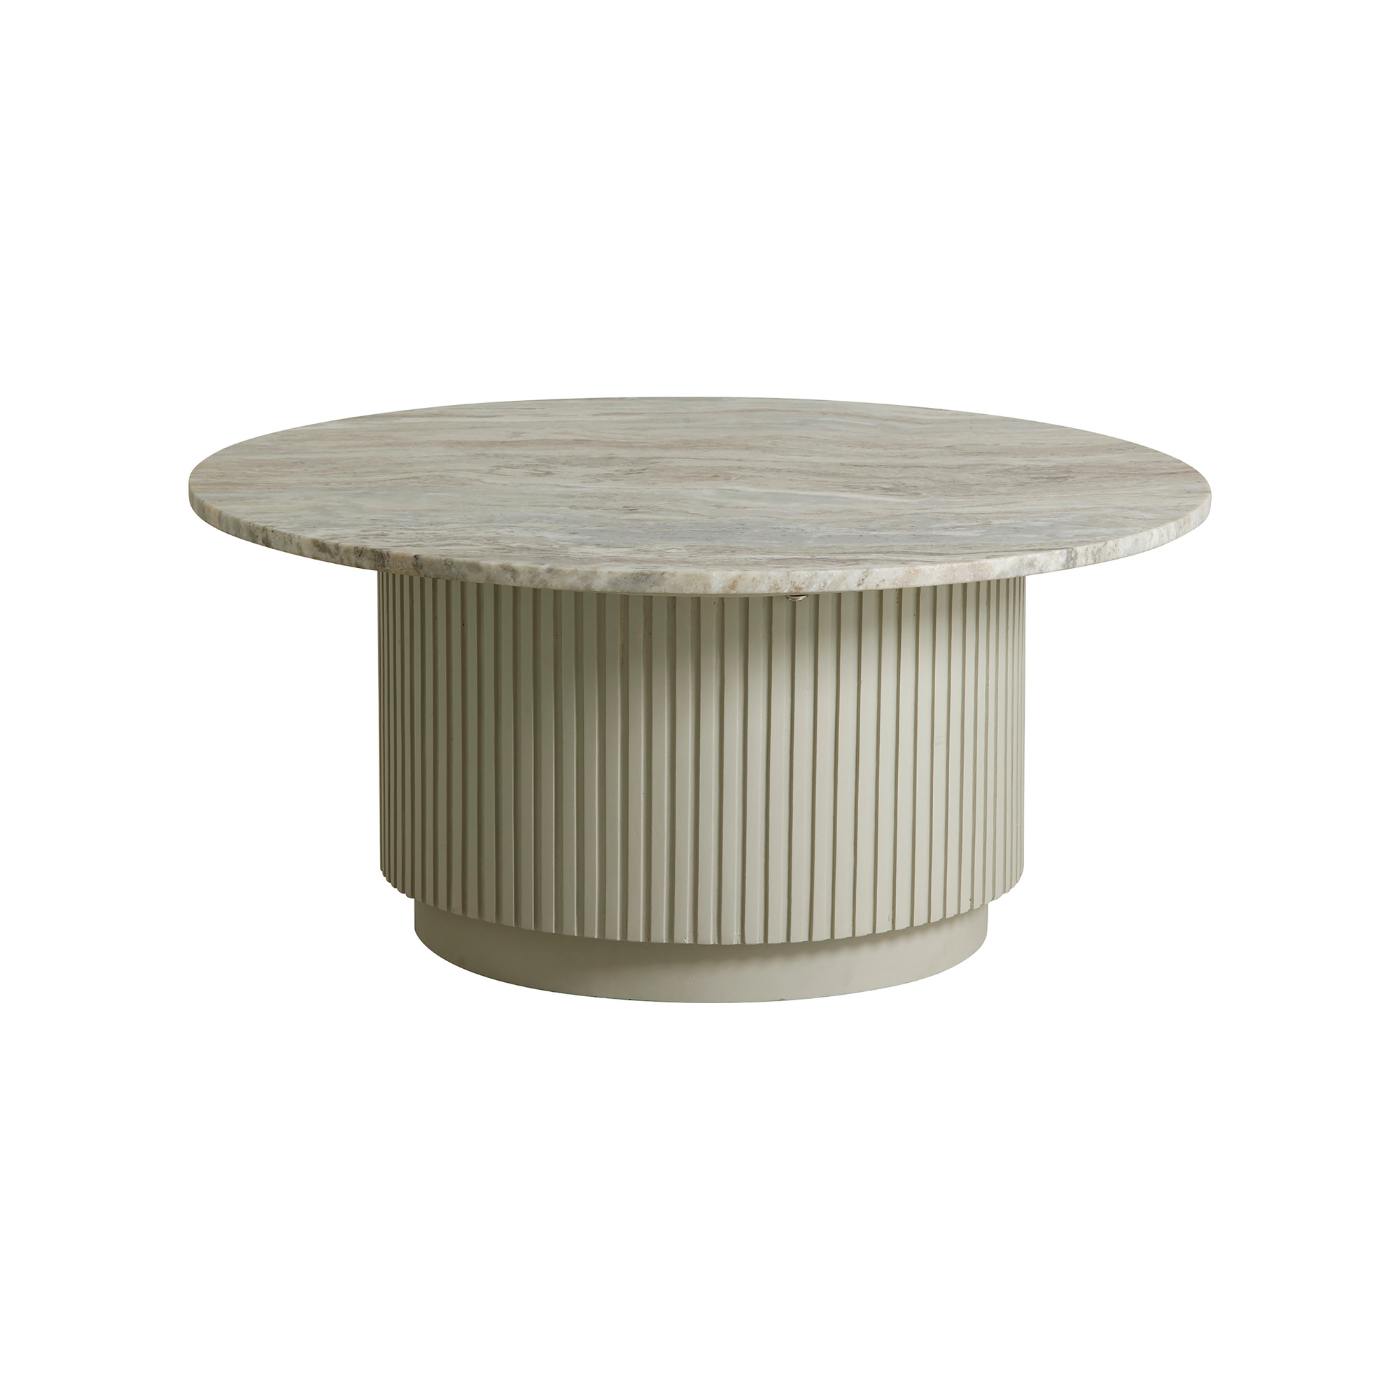 Erie Mango Wood Round Coffee Table with Marble Top - Large by Nordal